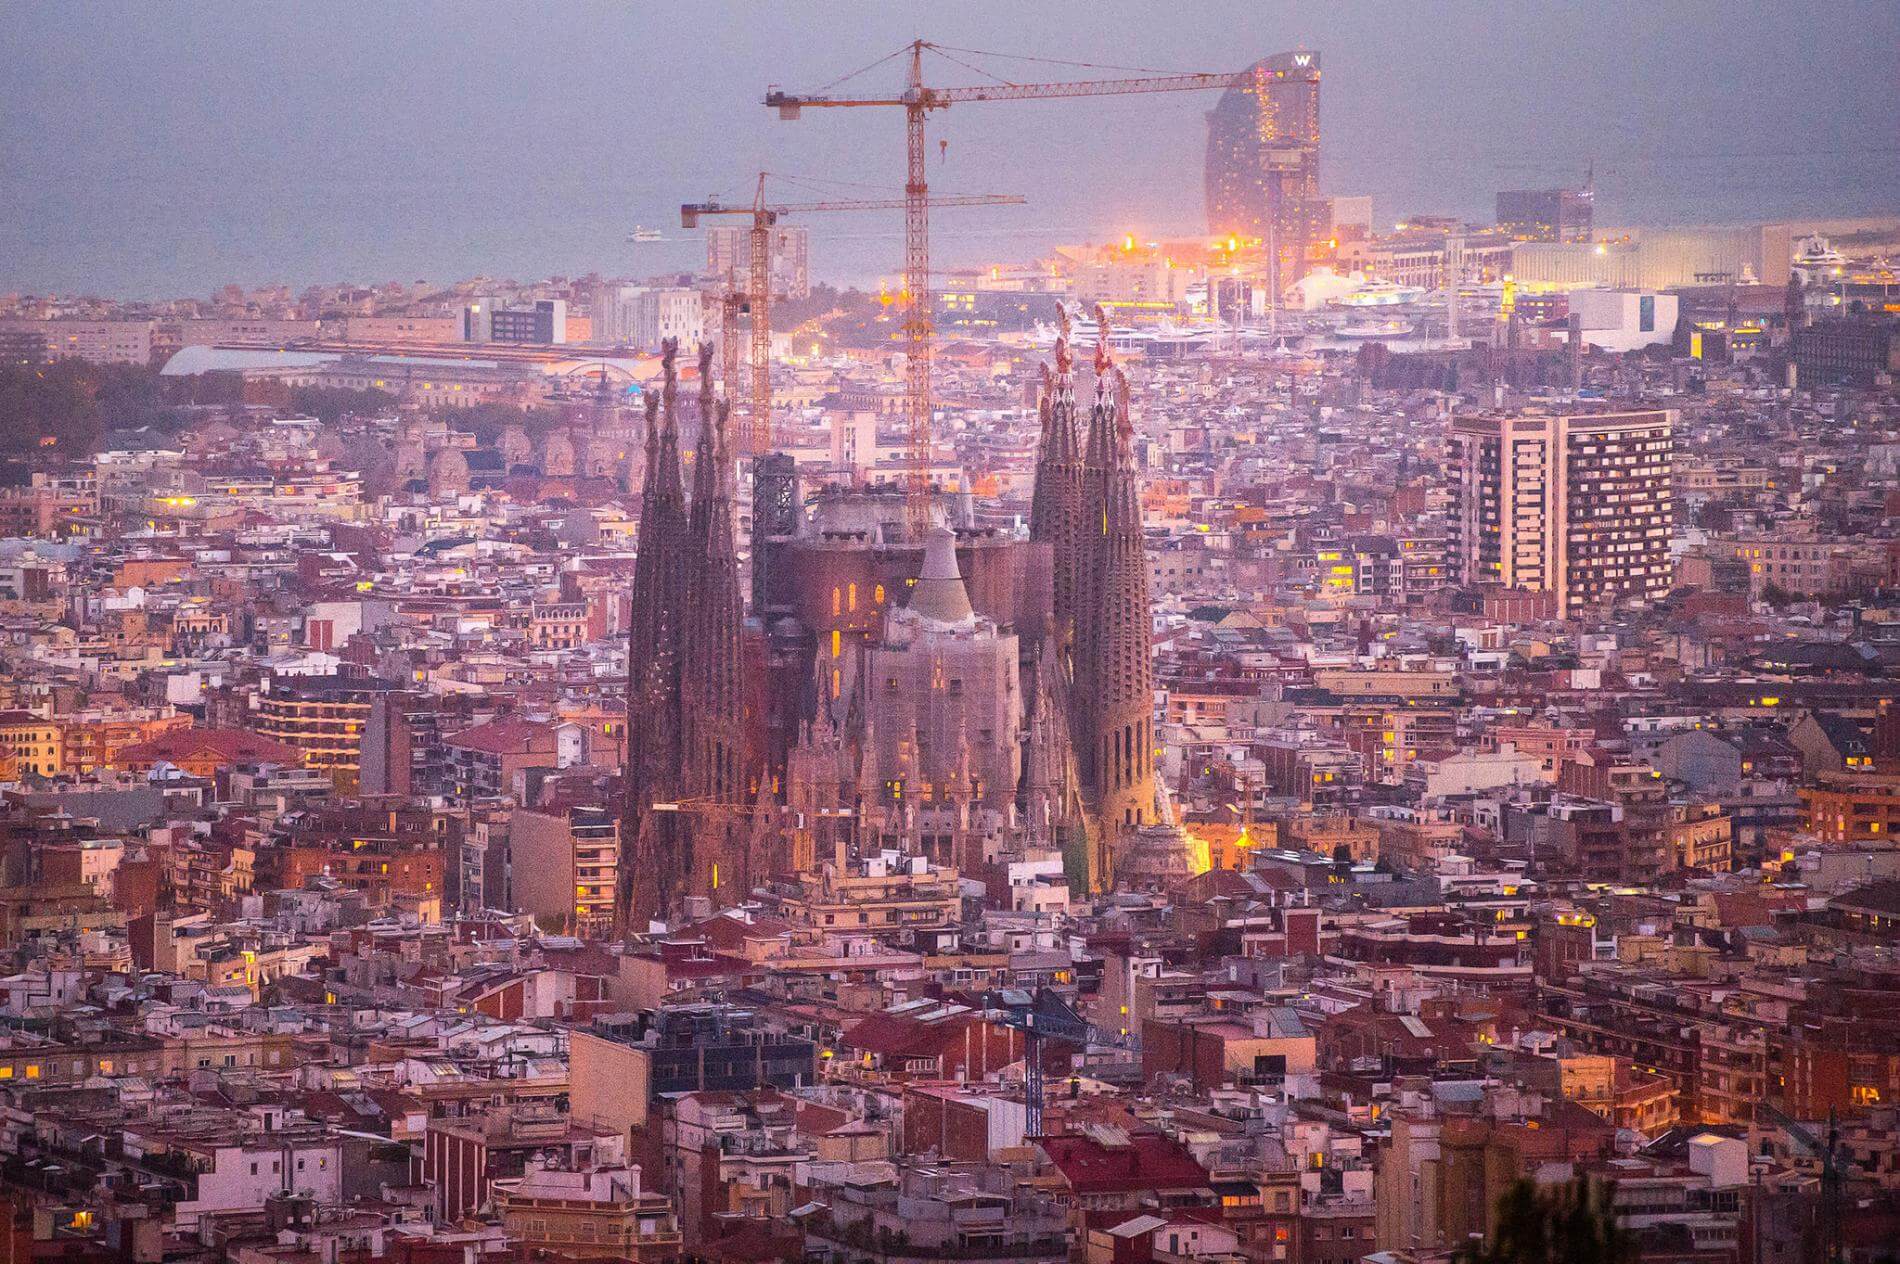 15 Gaudi Buildings In Barcelona That Will Amaze You - Live Enhanced